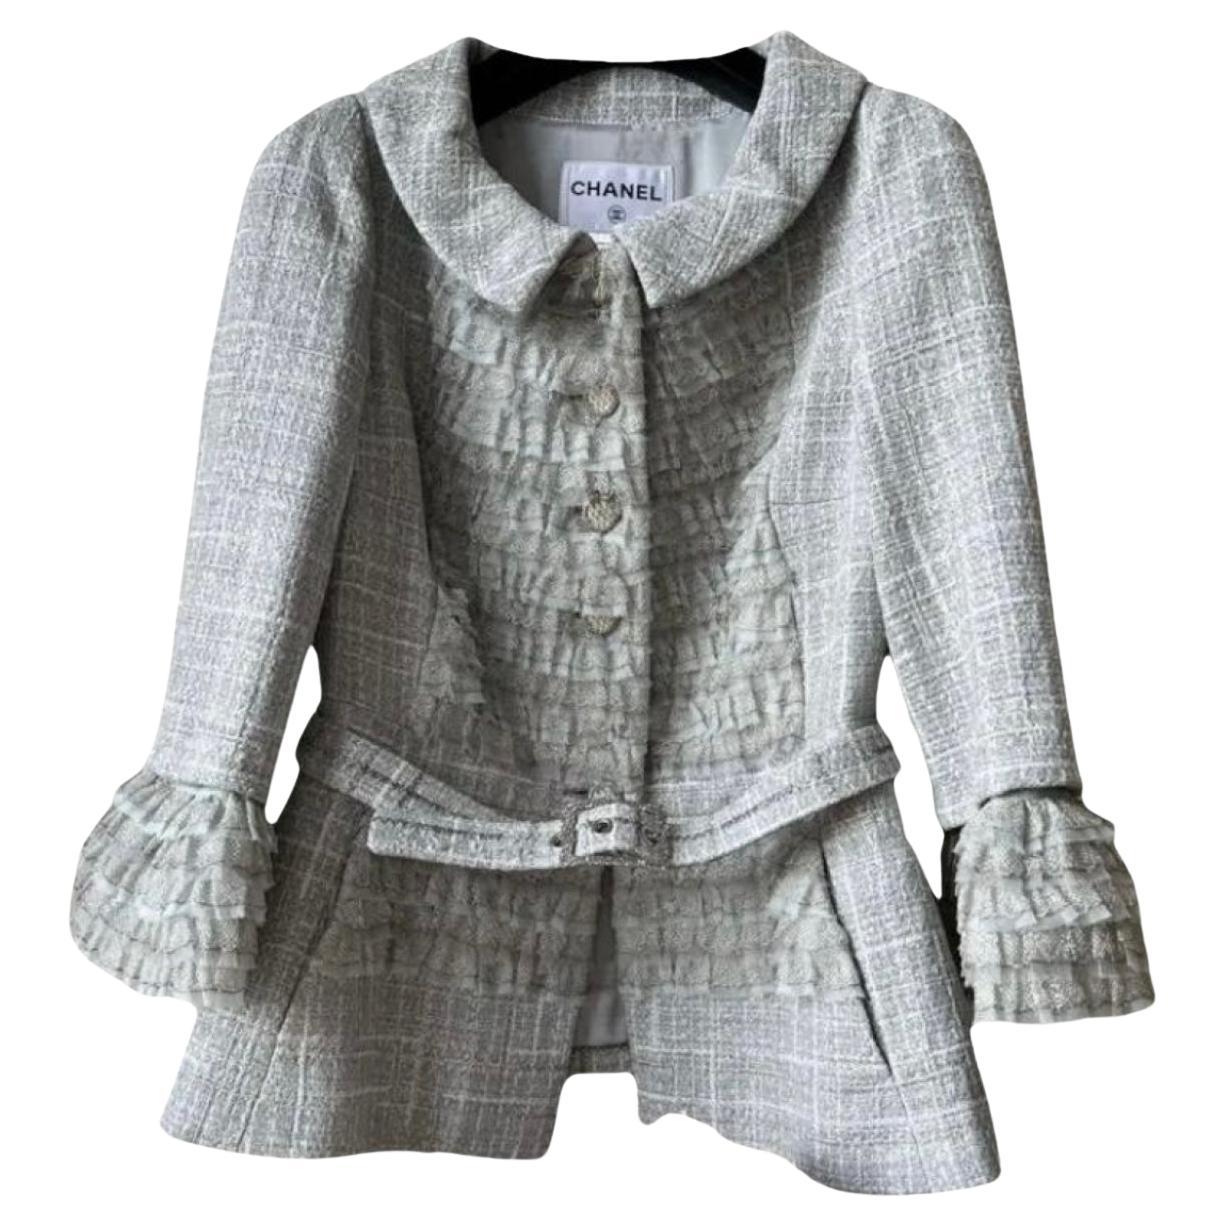 Chanel Collectible Cara Delevingne Style Tweed Jacket For Sale